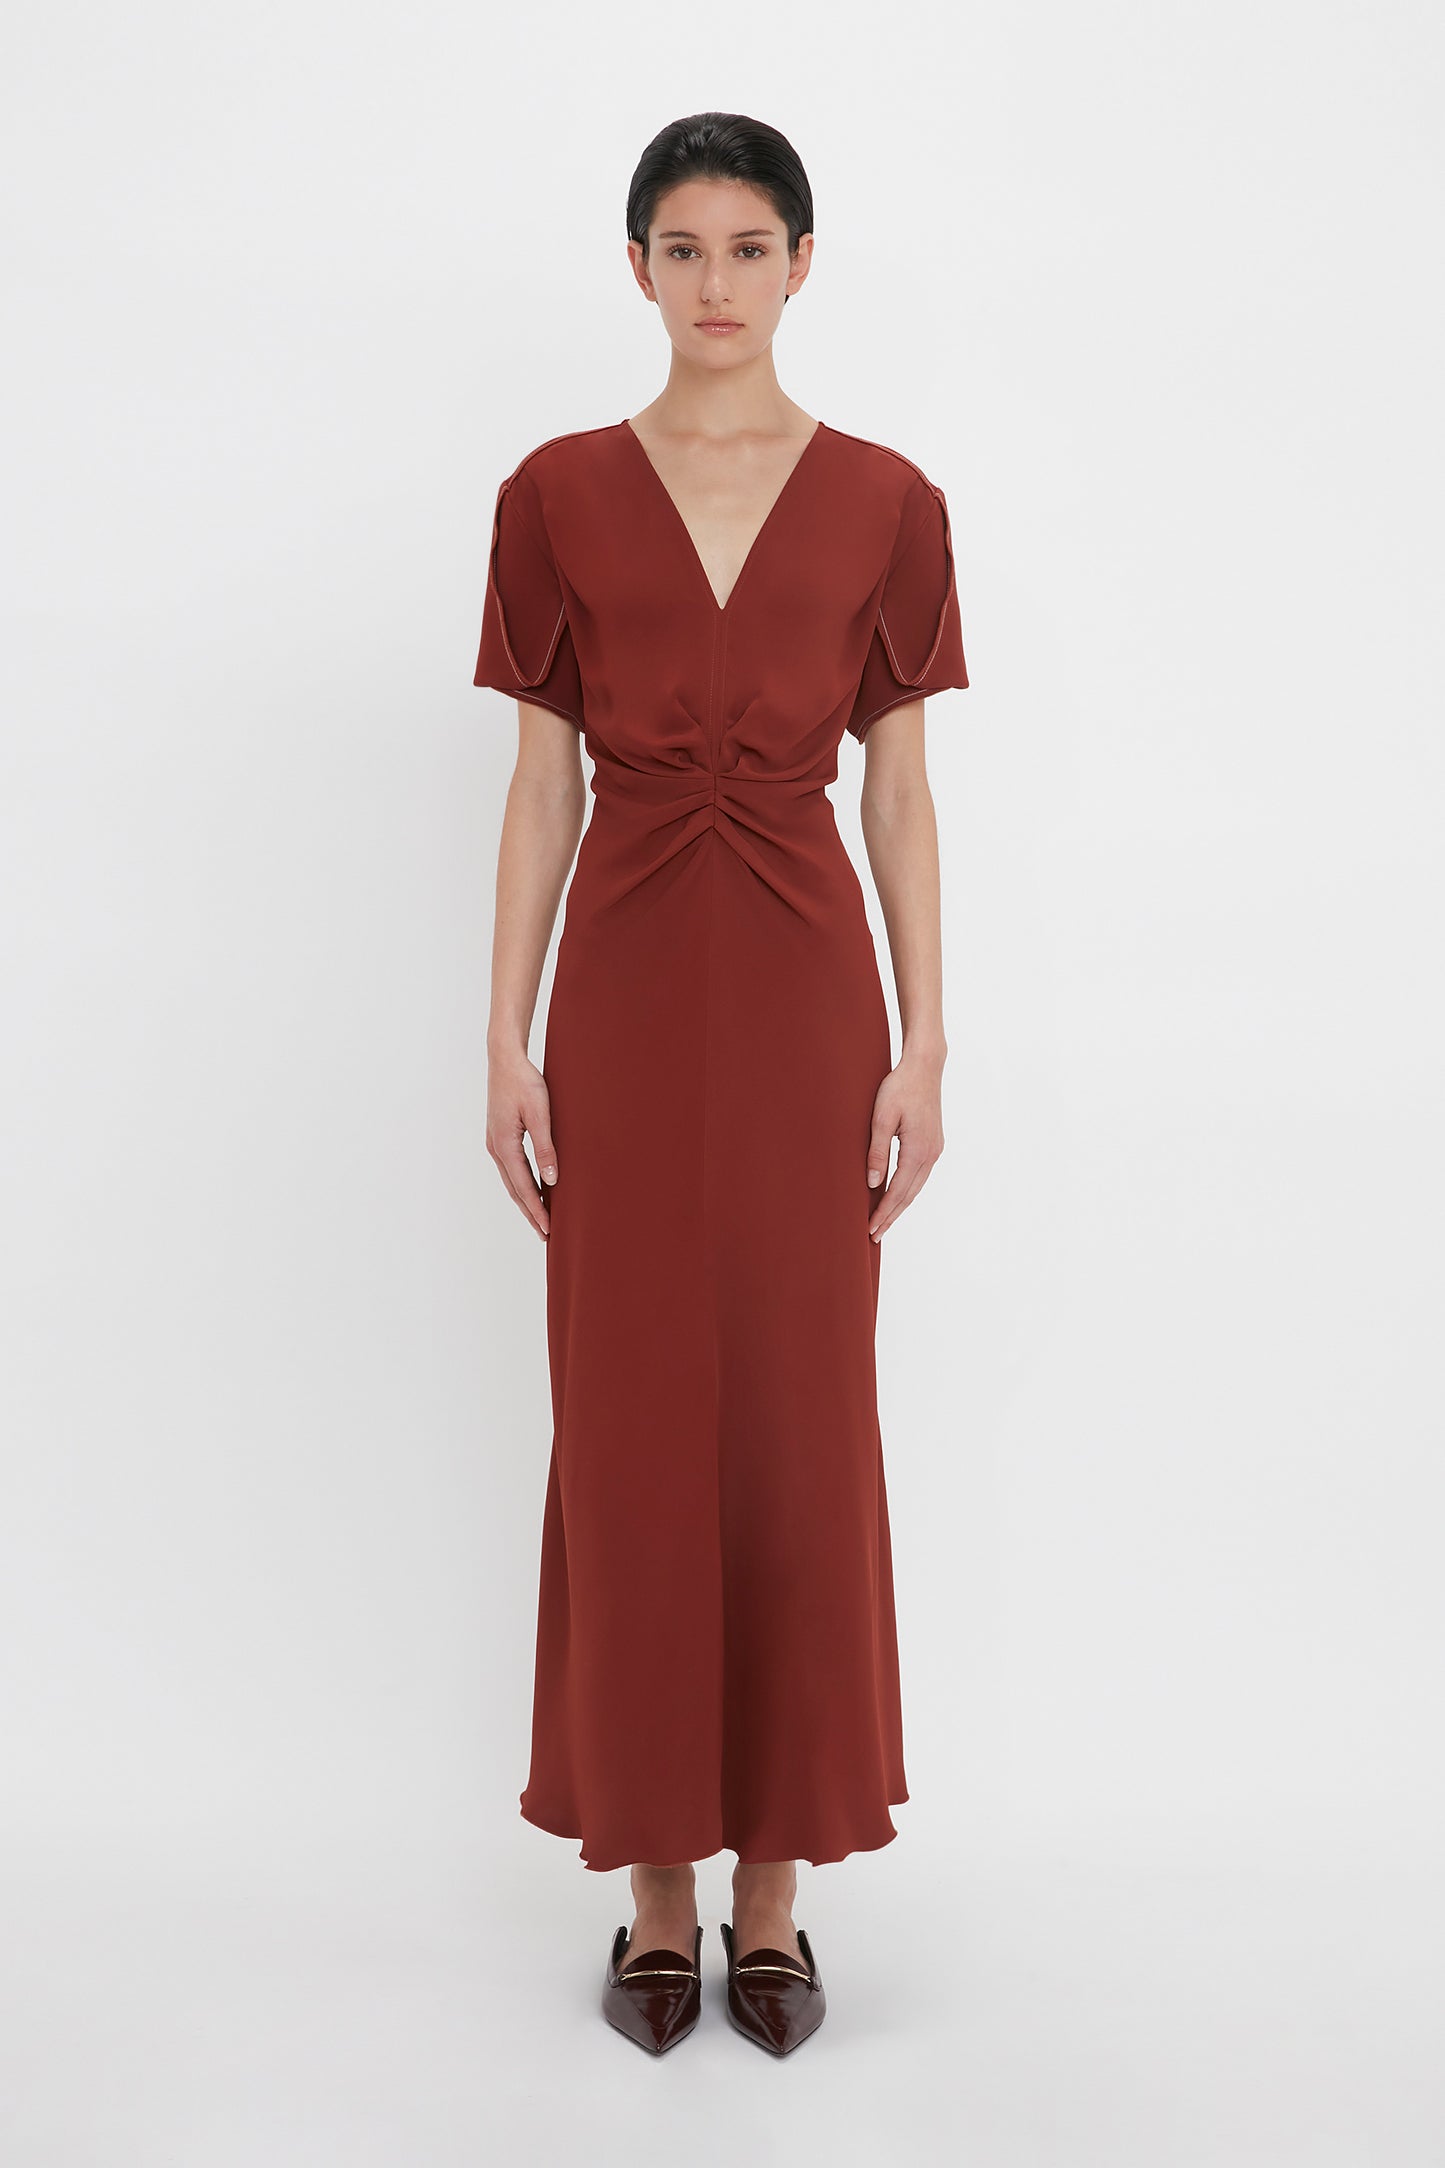 A person stands against a white background wearing a russet Gathered V-Neck Midi Dress In Russet by Victoria Beckham with a cinched waist and short sleeves, complemented by pointed dark brown shoes.